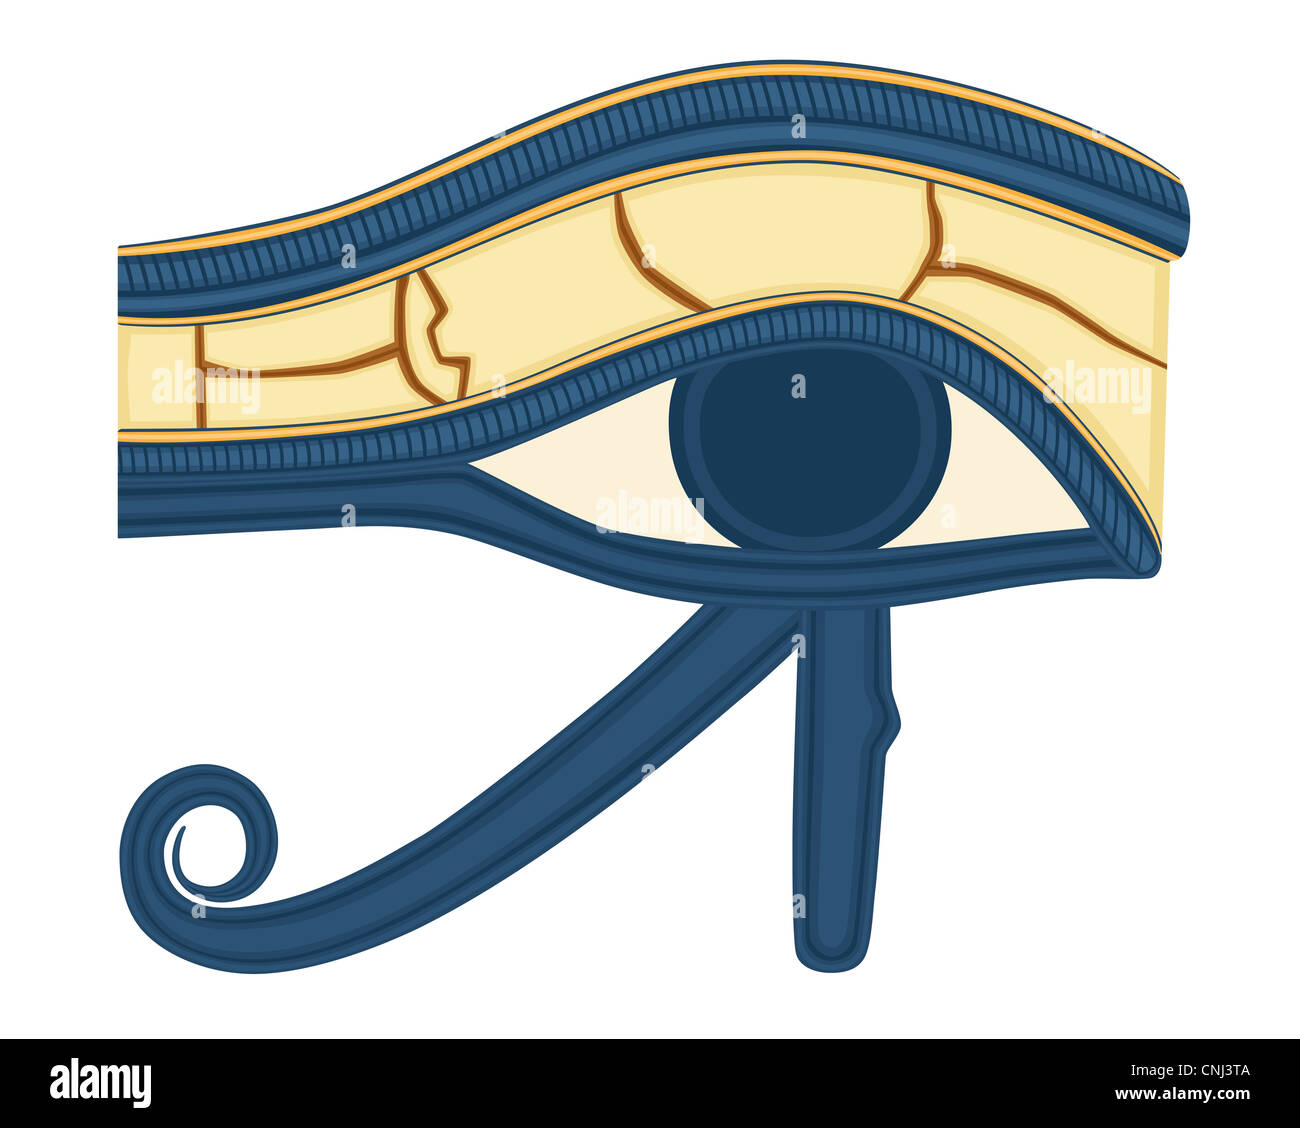 The Eye of Horus (Eye of Ra, Wadjet) believed by ancient Egyptians to have healing and protective powers. Stock Photo